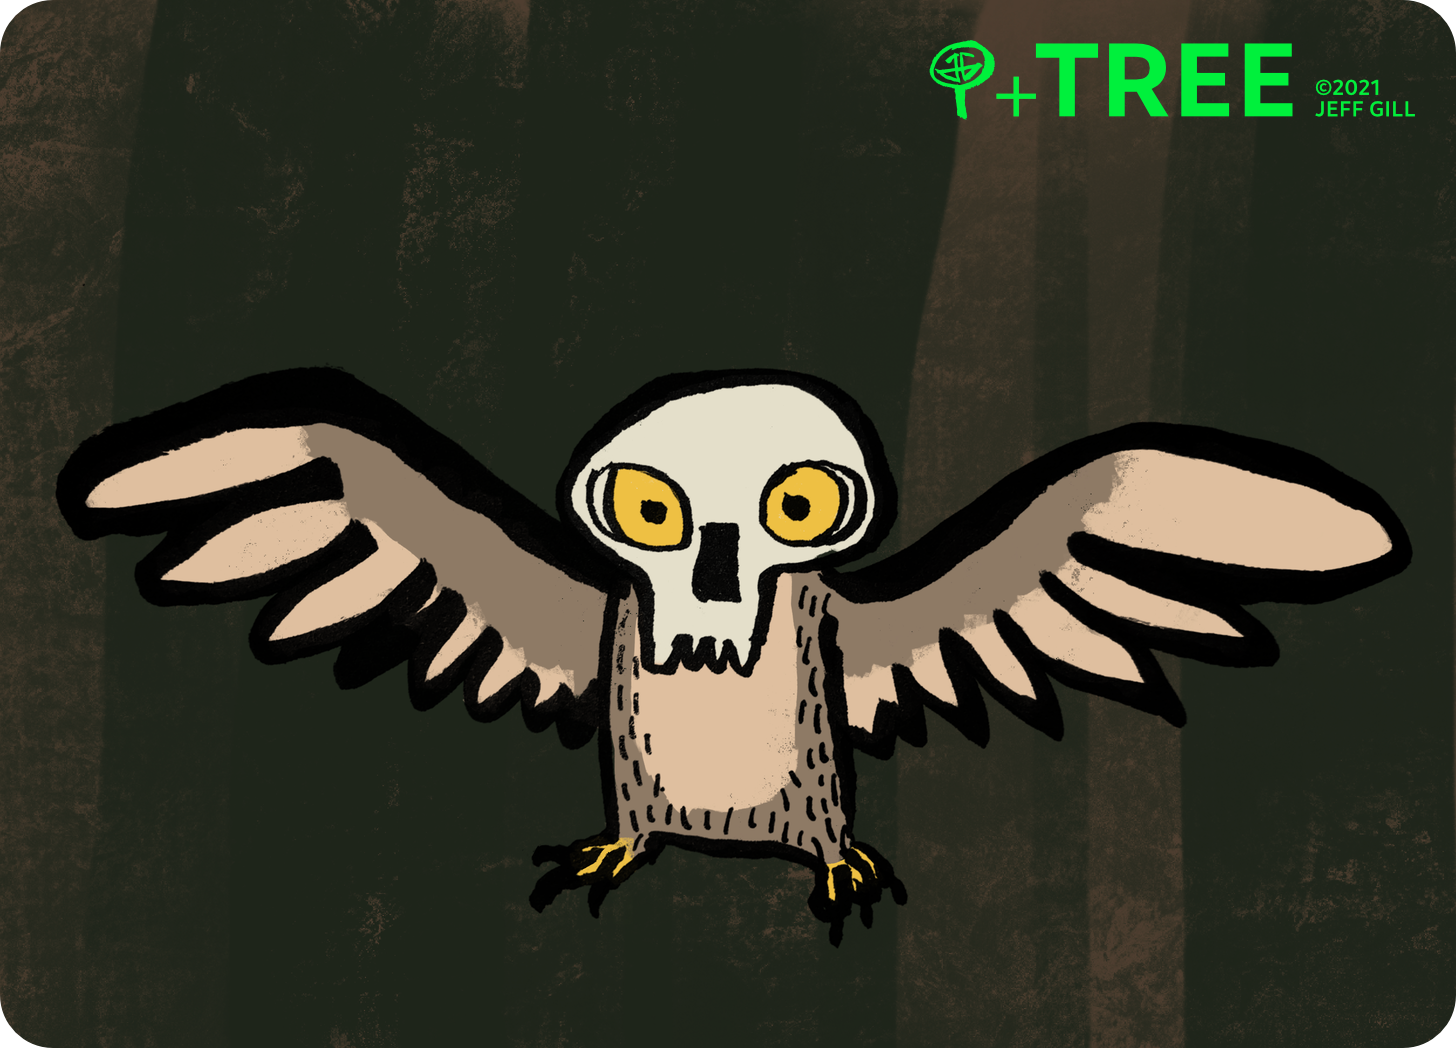 Illustration of a large owl with outstretched wings and wearing a human skull like a helmet